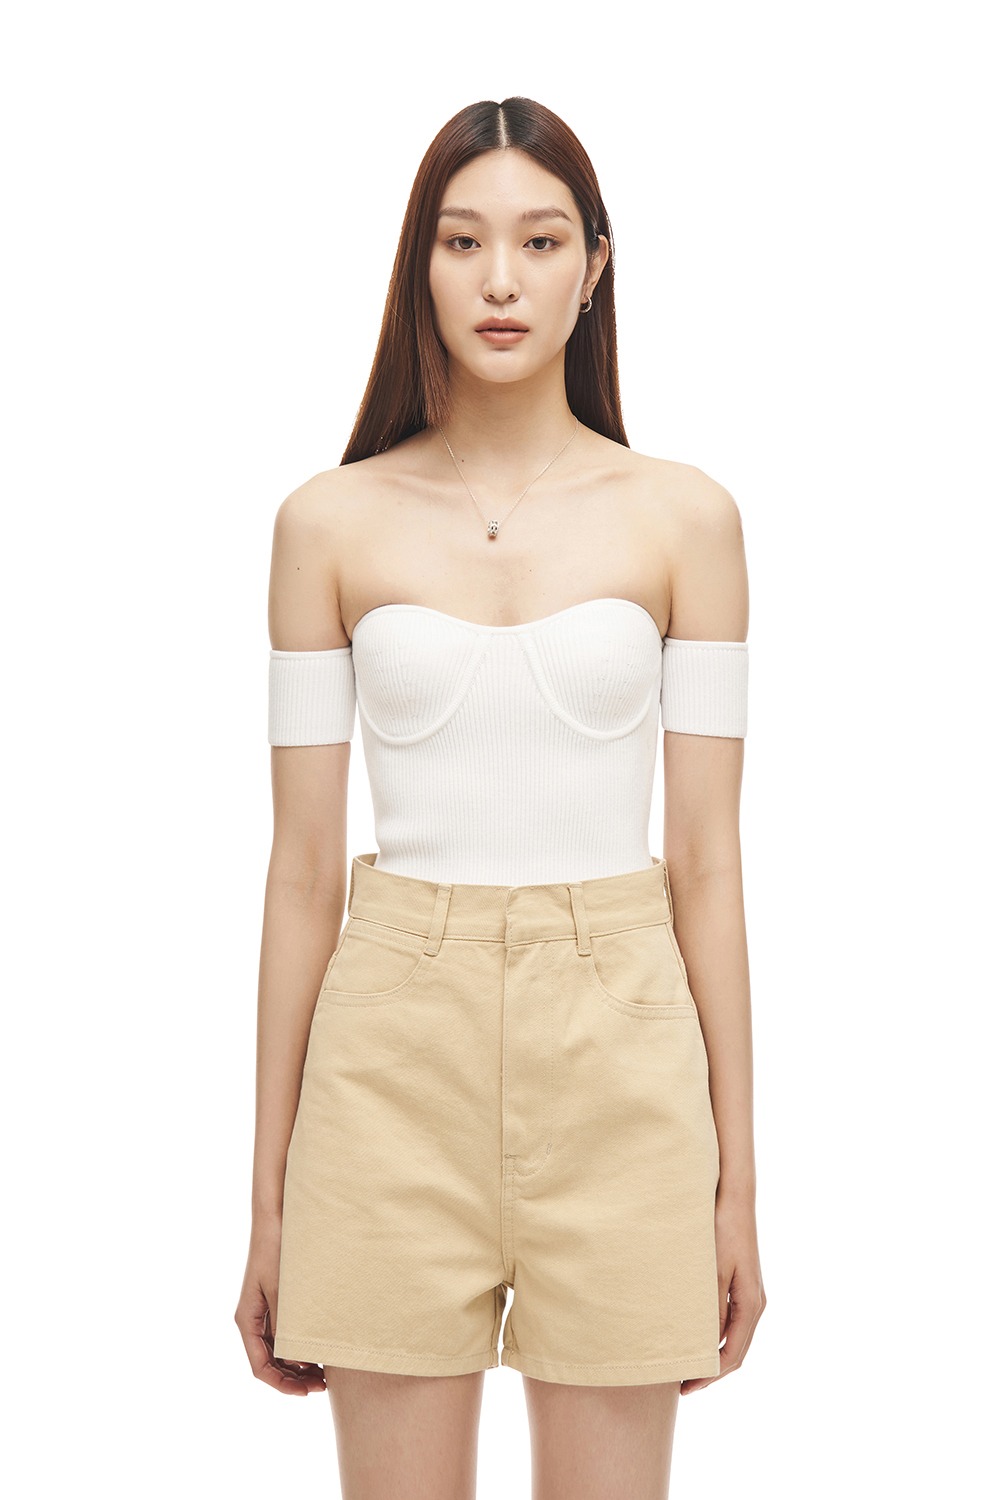 CONTOUR TOP. PINCHED (WHITE)